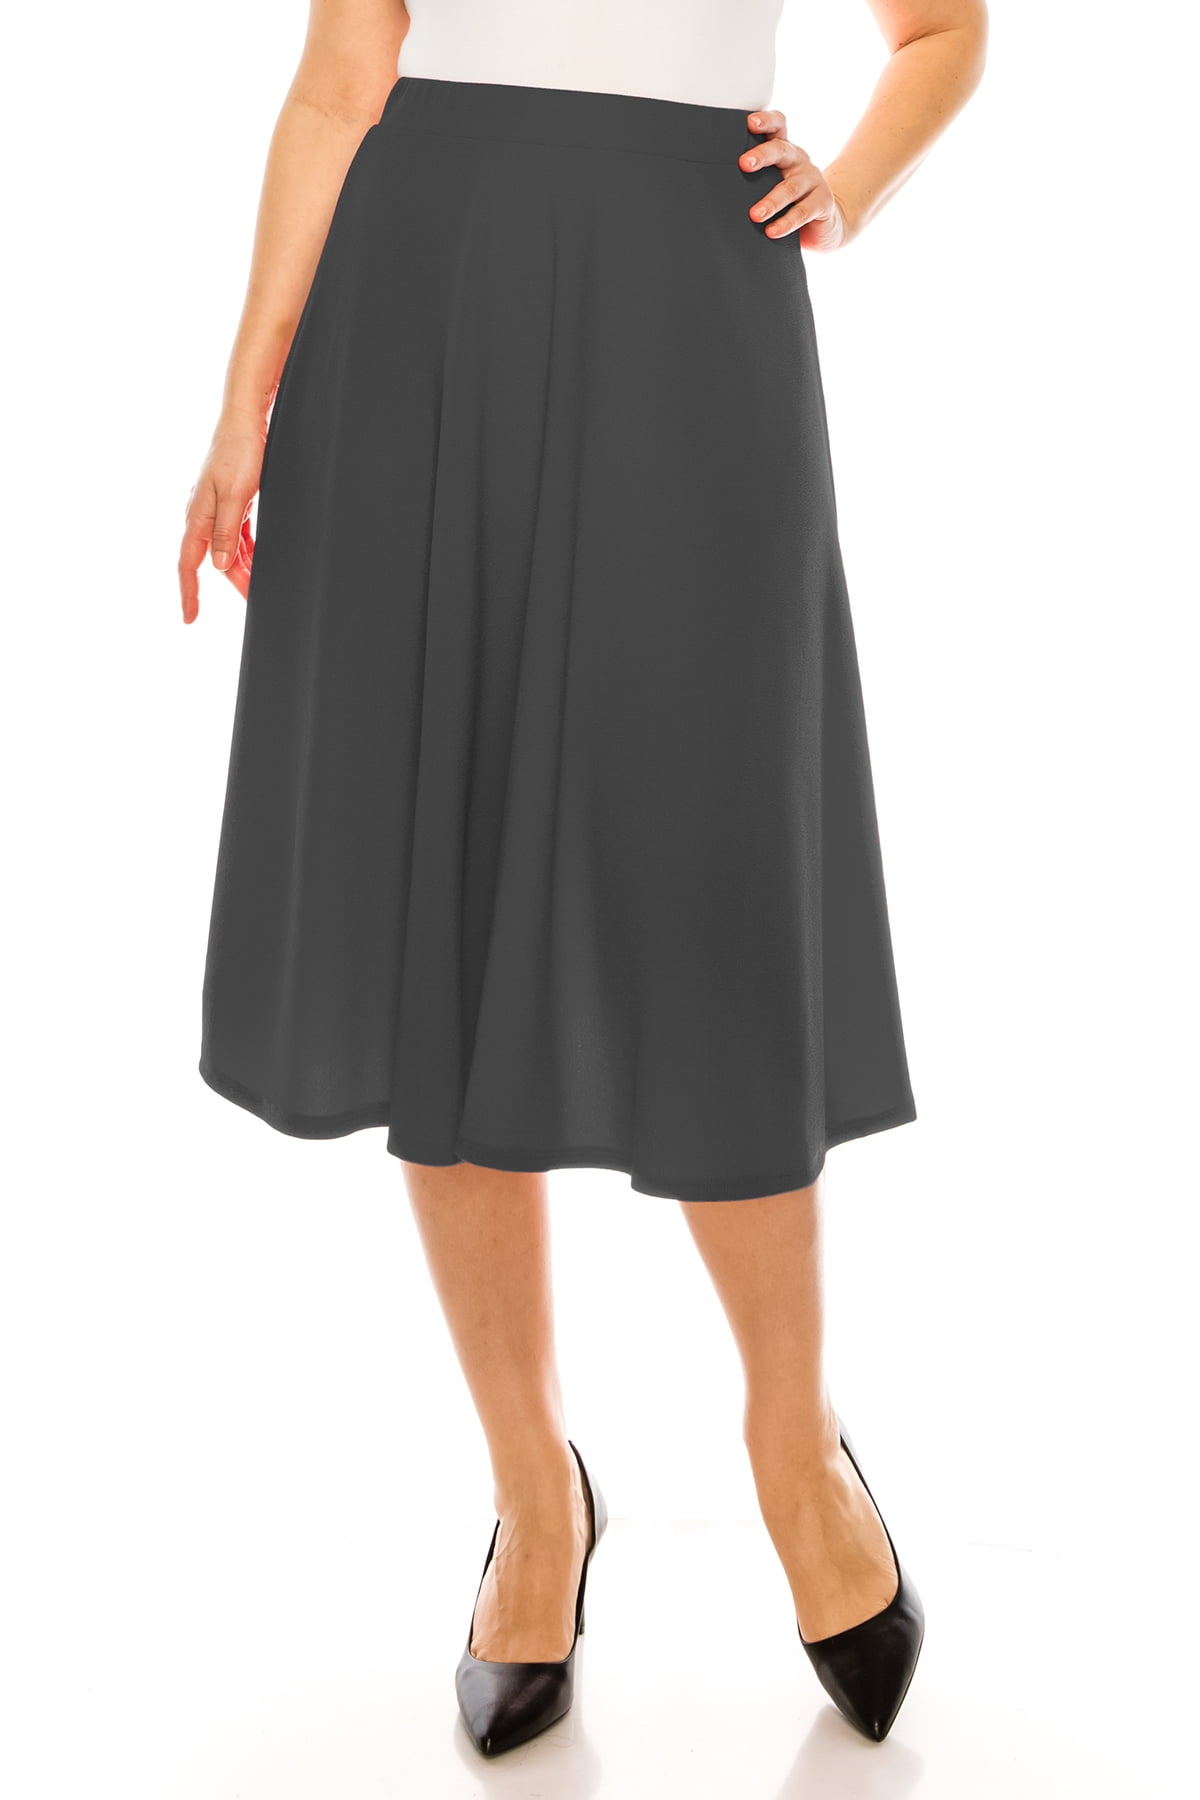 Women's Plus Size A-Line Casual Flared Elastic Band Midi Skirt ...